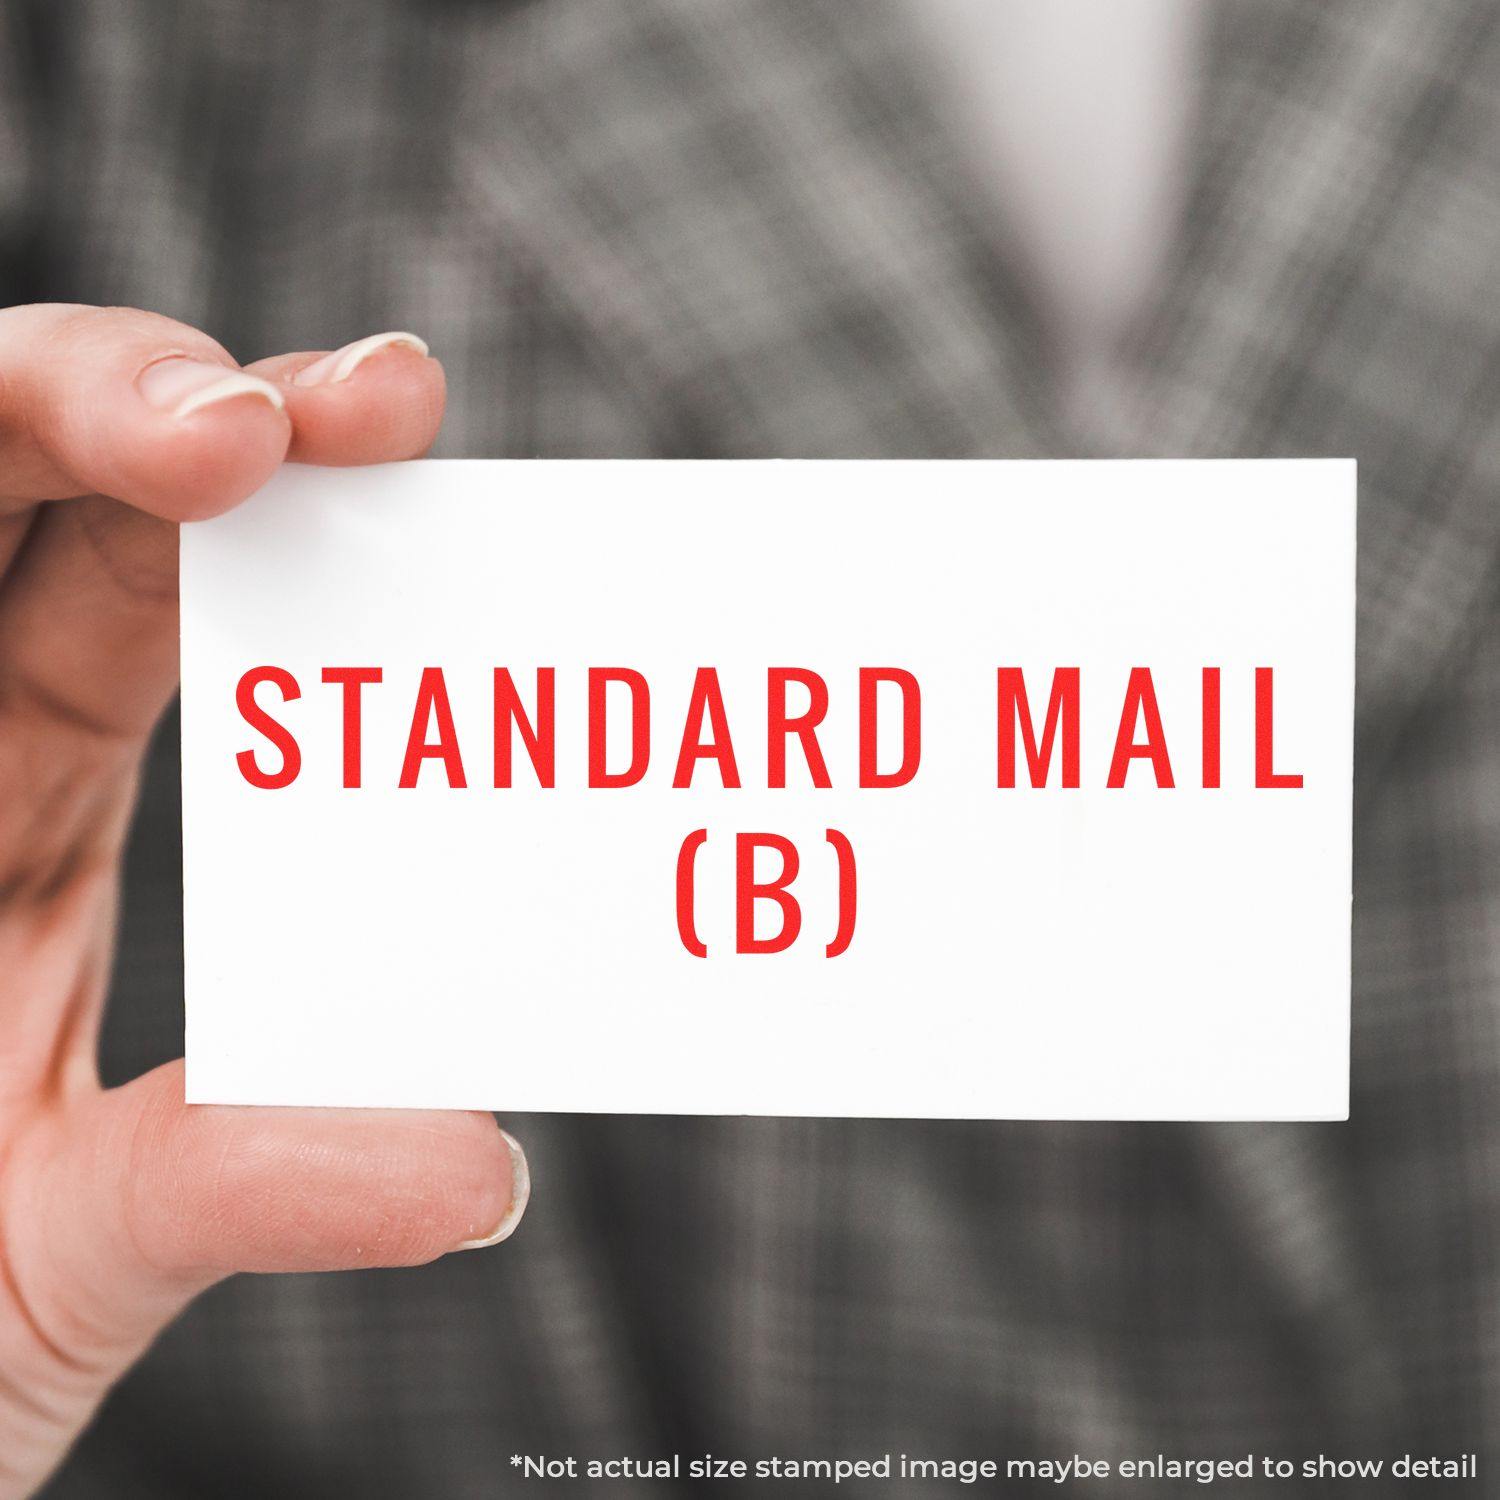 A self-inking stamp with a stamped image showing how the text "STANDARD MAIL (B)" is displayed after stamping.